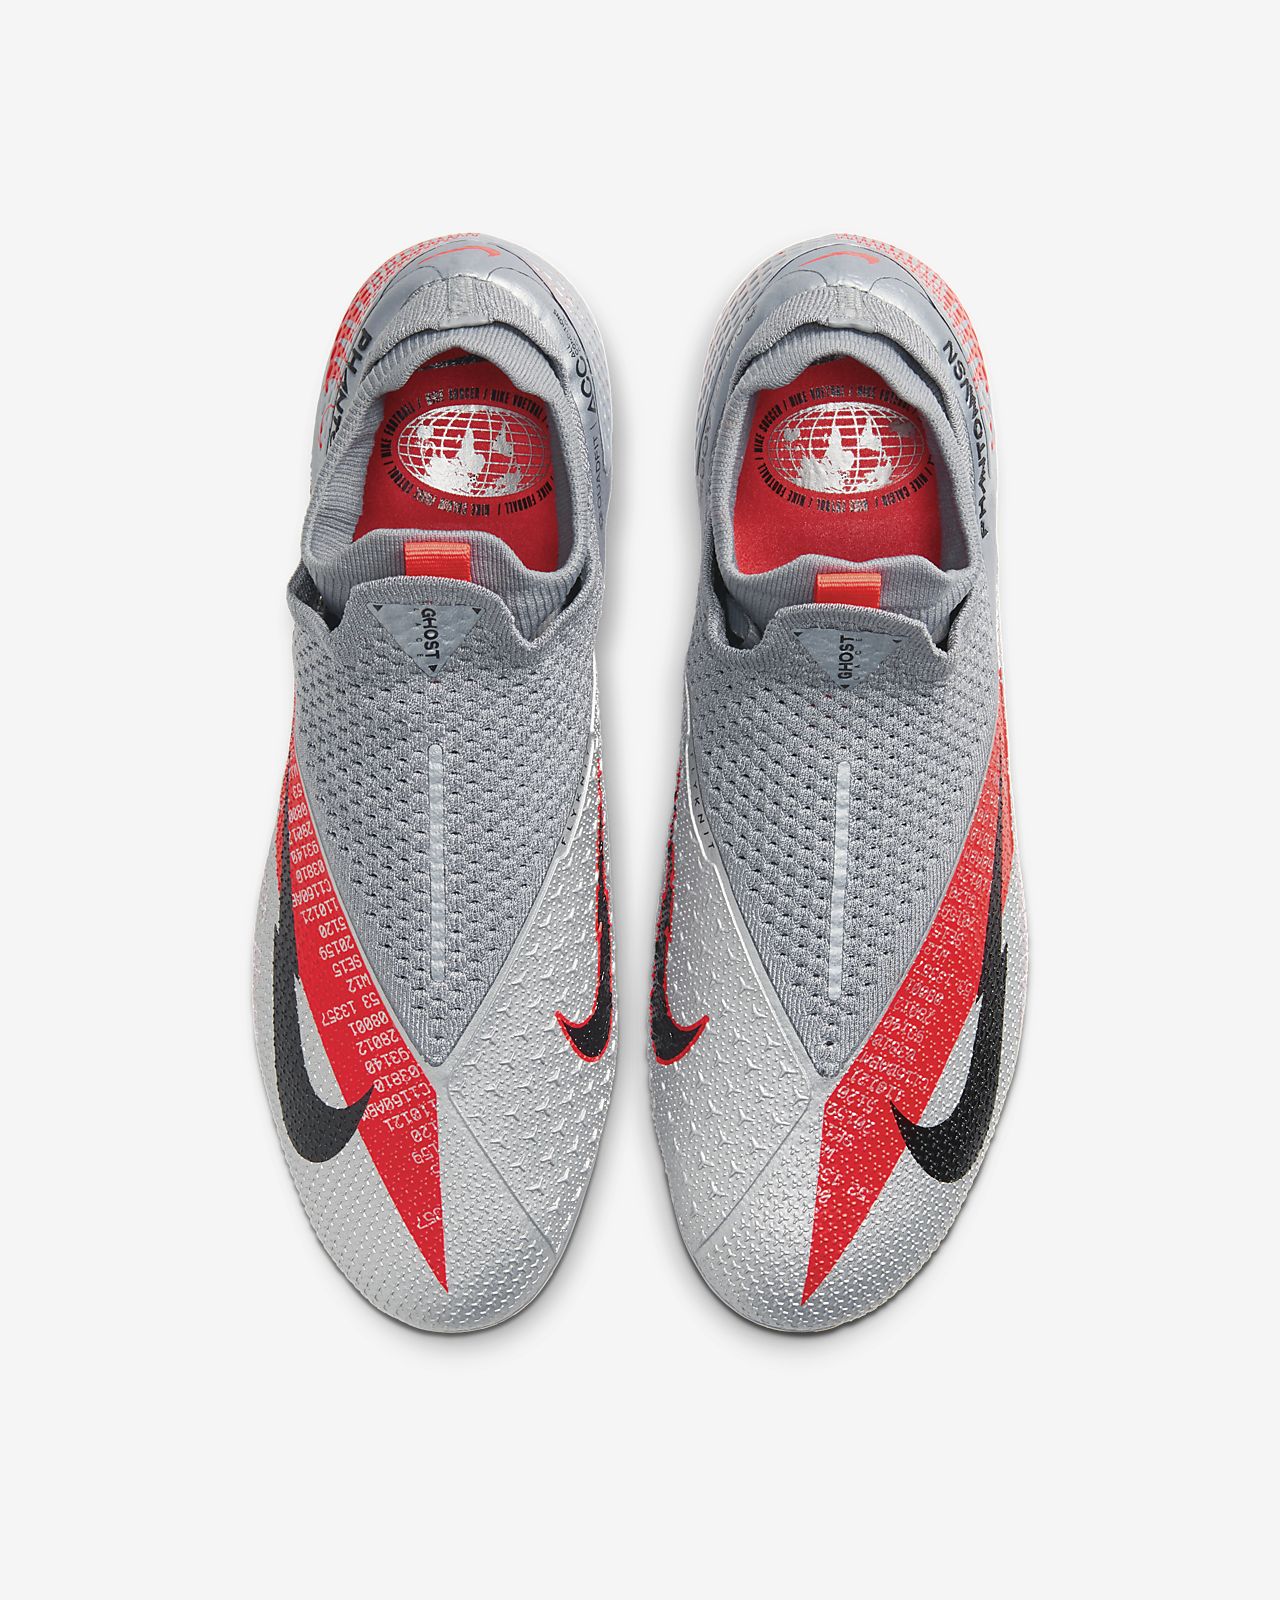 Nike Phantom Vision Academy IC Indoor Soccer Shoes